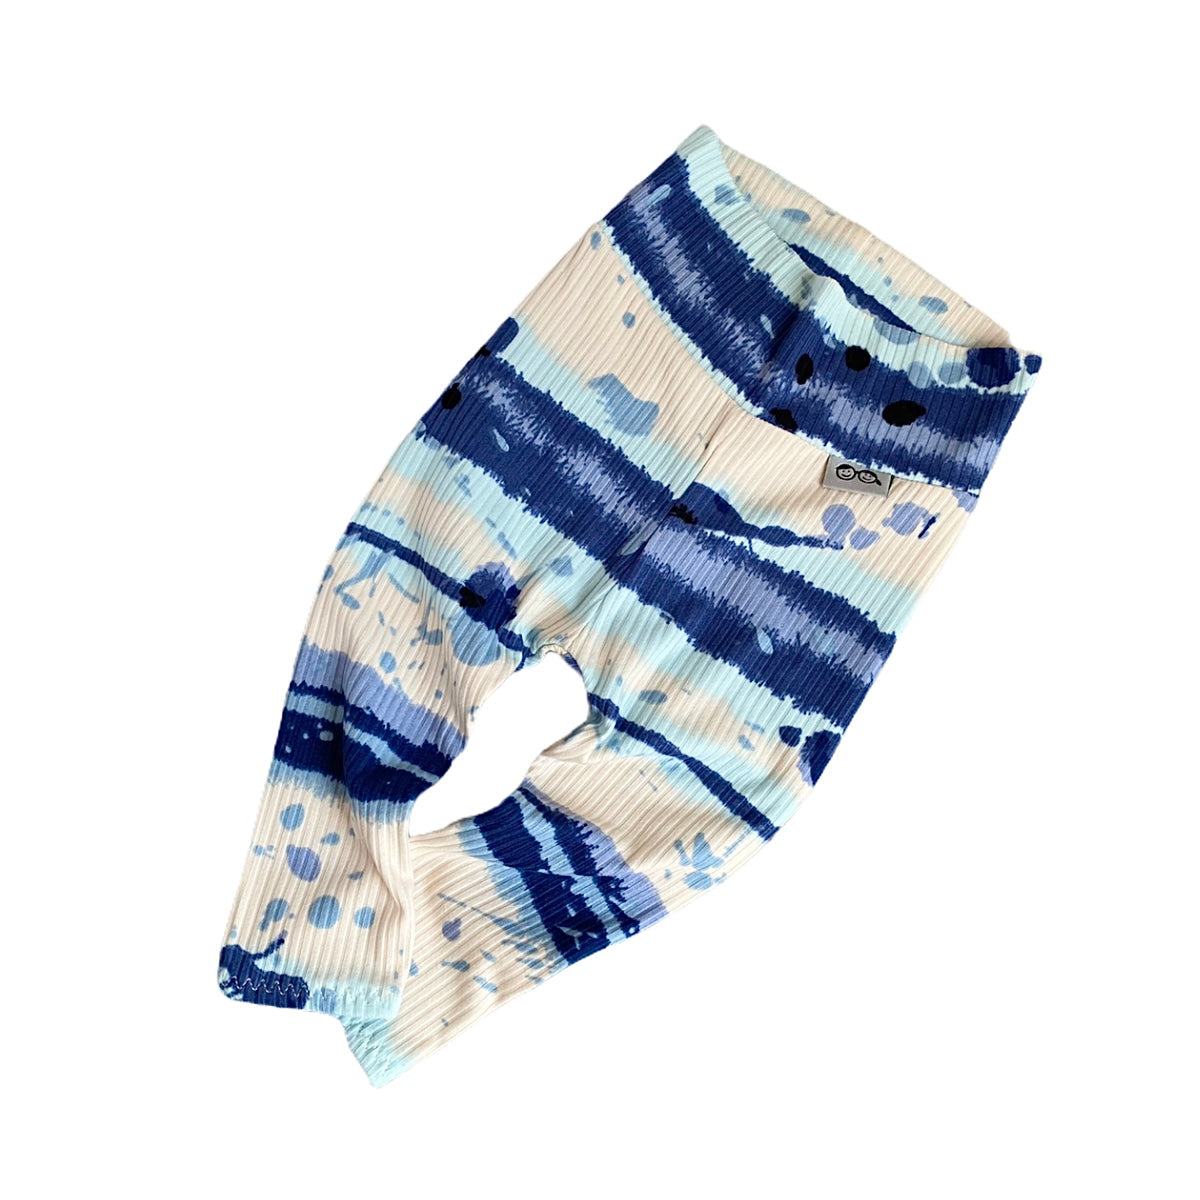 Blue Abstract Striped Rib Leggings and/or Knot Beanie Hat